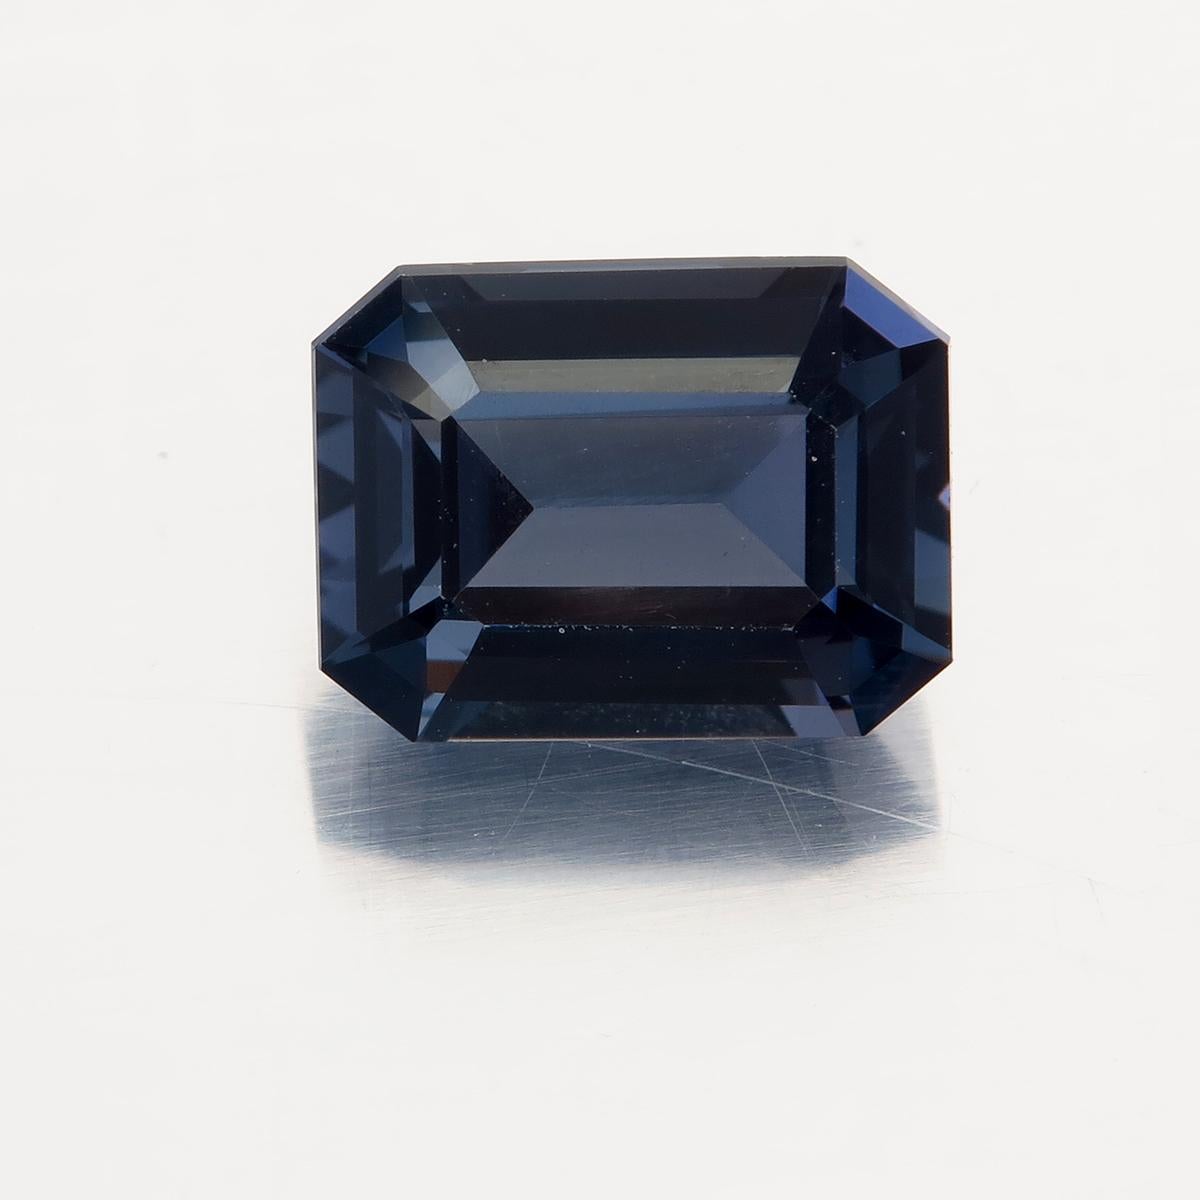 Rare 2.90 Carat color change Spinel from Sri Lanka 
Lotus Certified report: 2661-6868
Shape: Octagonal
Cutting style: Faceted, Crown: Step, Pavilion: Step
Color: Blue, this gem display a rare change-of-color effect between daylight and incandescent